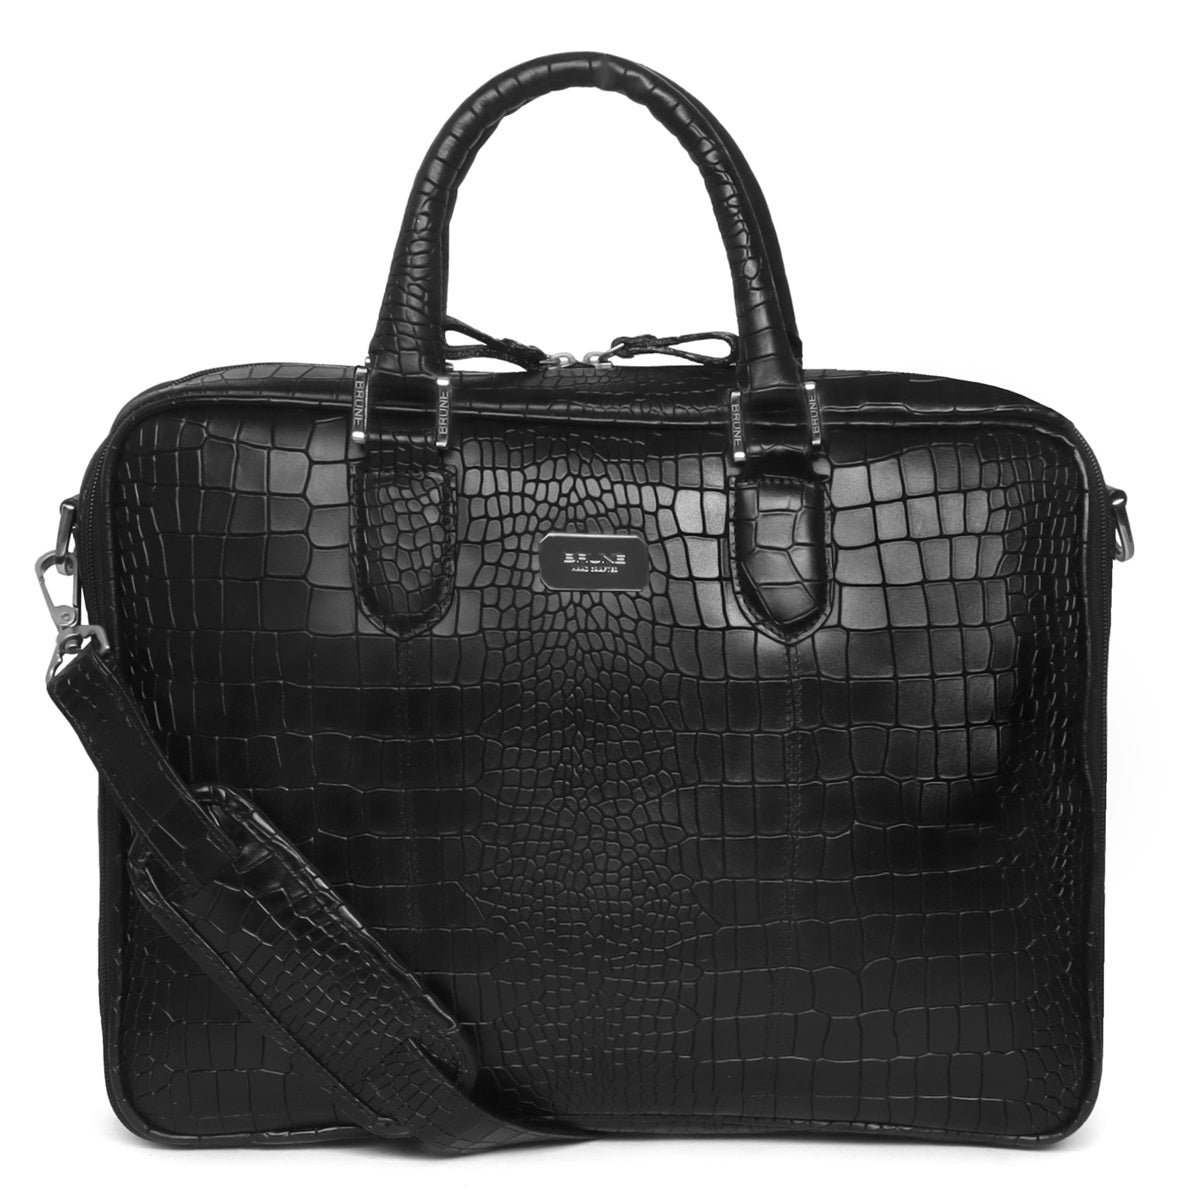 Black Deep Cut Textured Leather Laptop/Office Bag with Silver Accessories By Brune & Bareskin